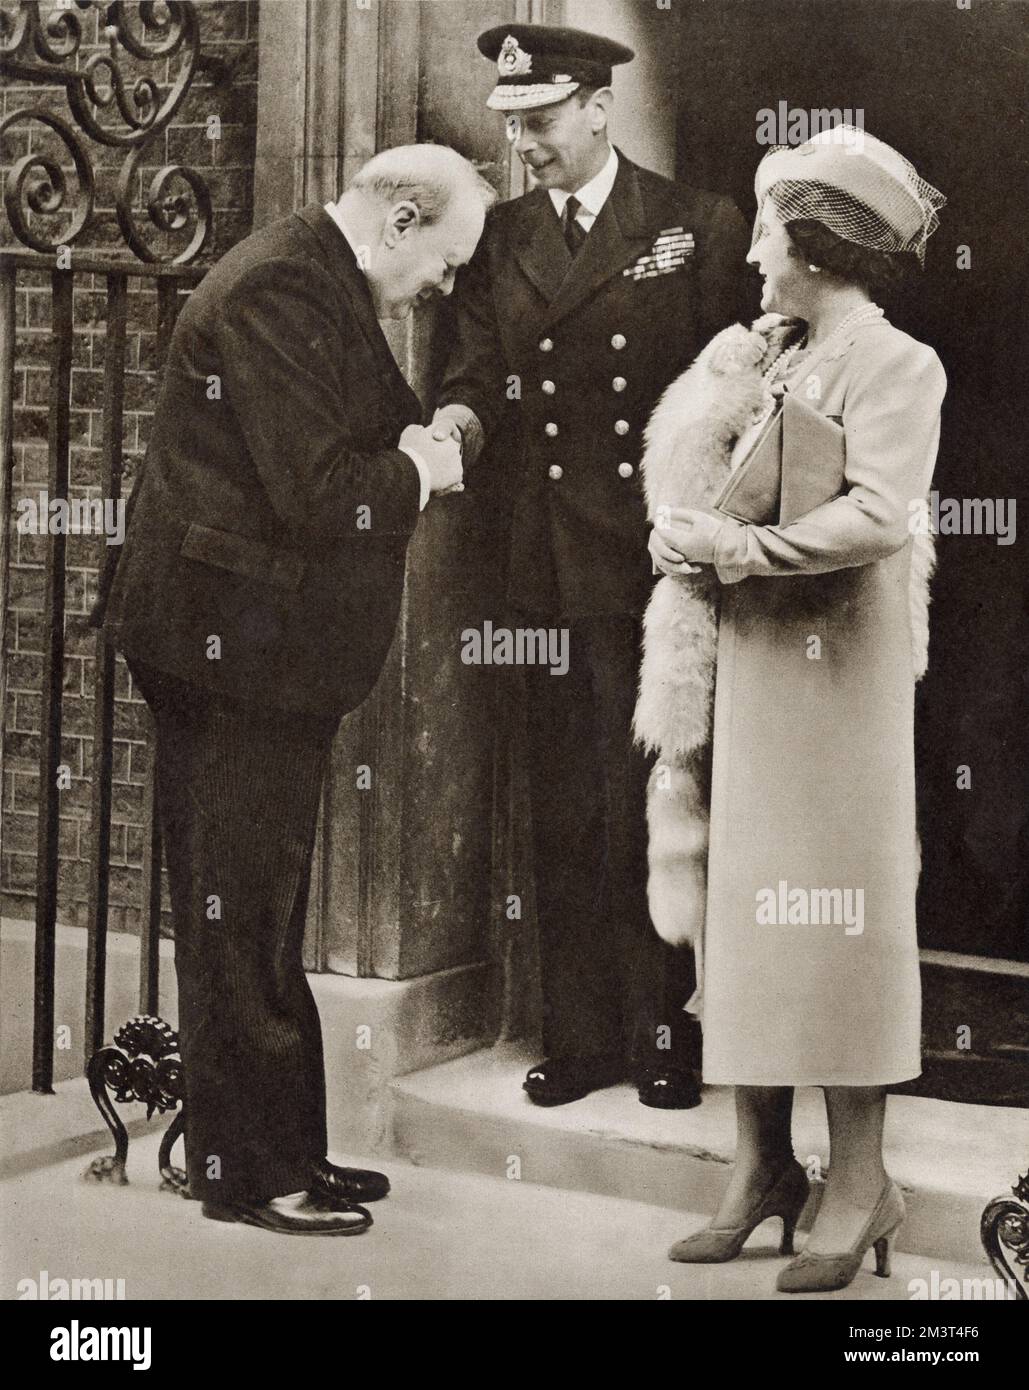 The Realm's Great Three. Prime Minister Winston Churchill saying goodbye to King George VI and Queen Elizabeth, as they left 10 Downing Street after a private luncheon. Stock Photo